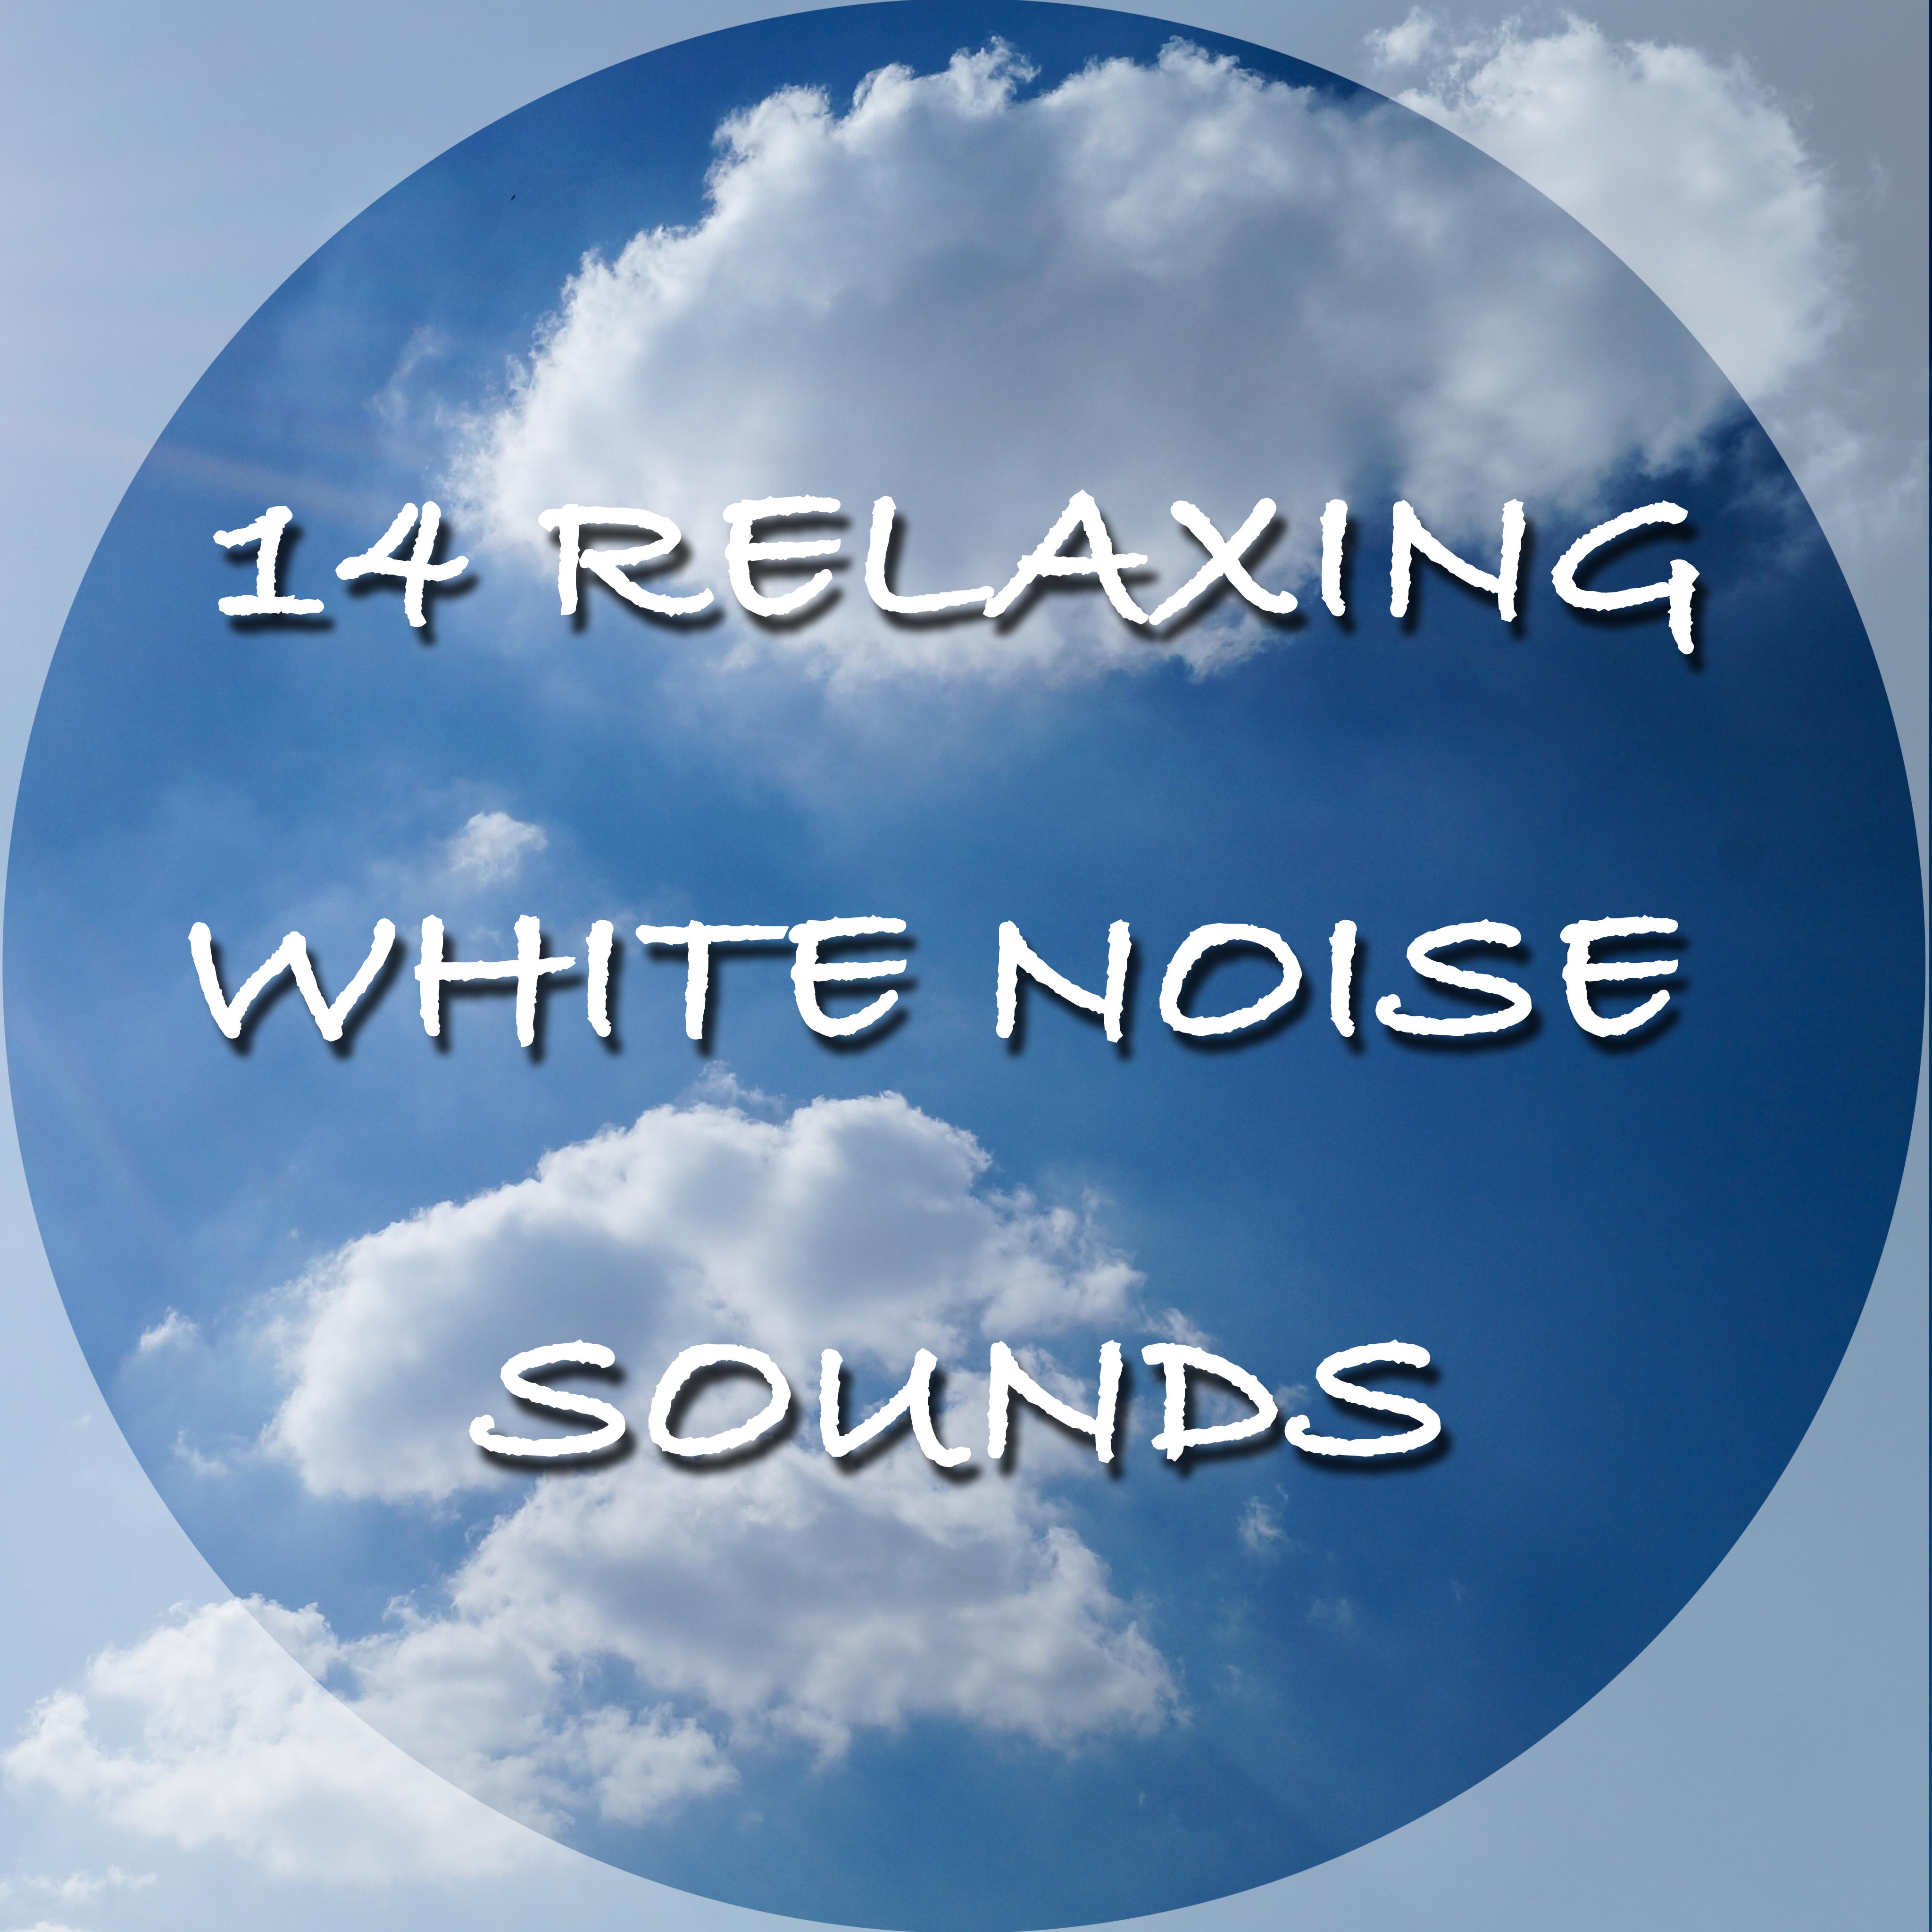 14 Relaxing White Noise Sounds